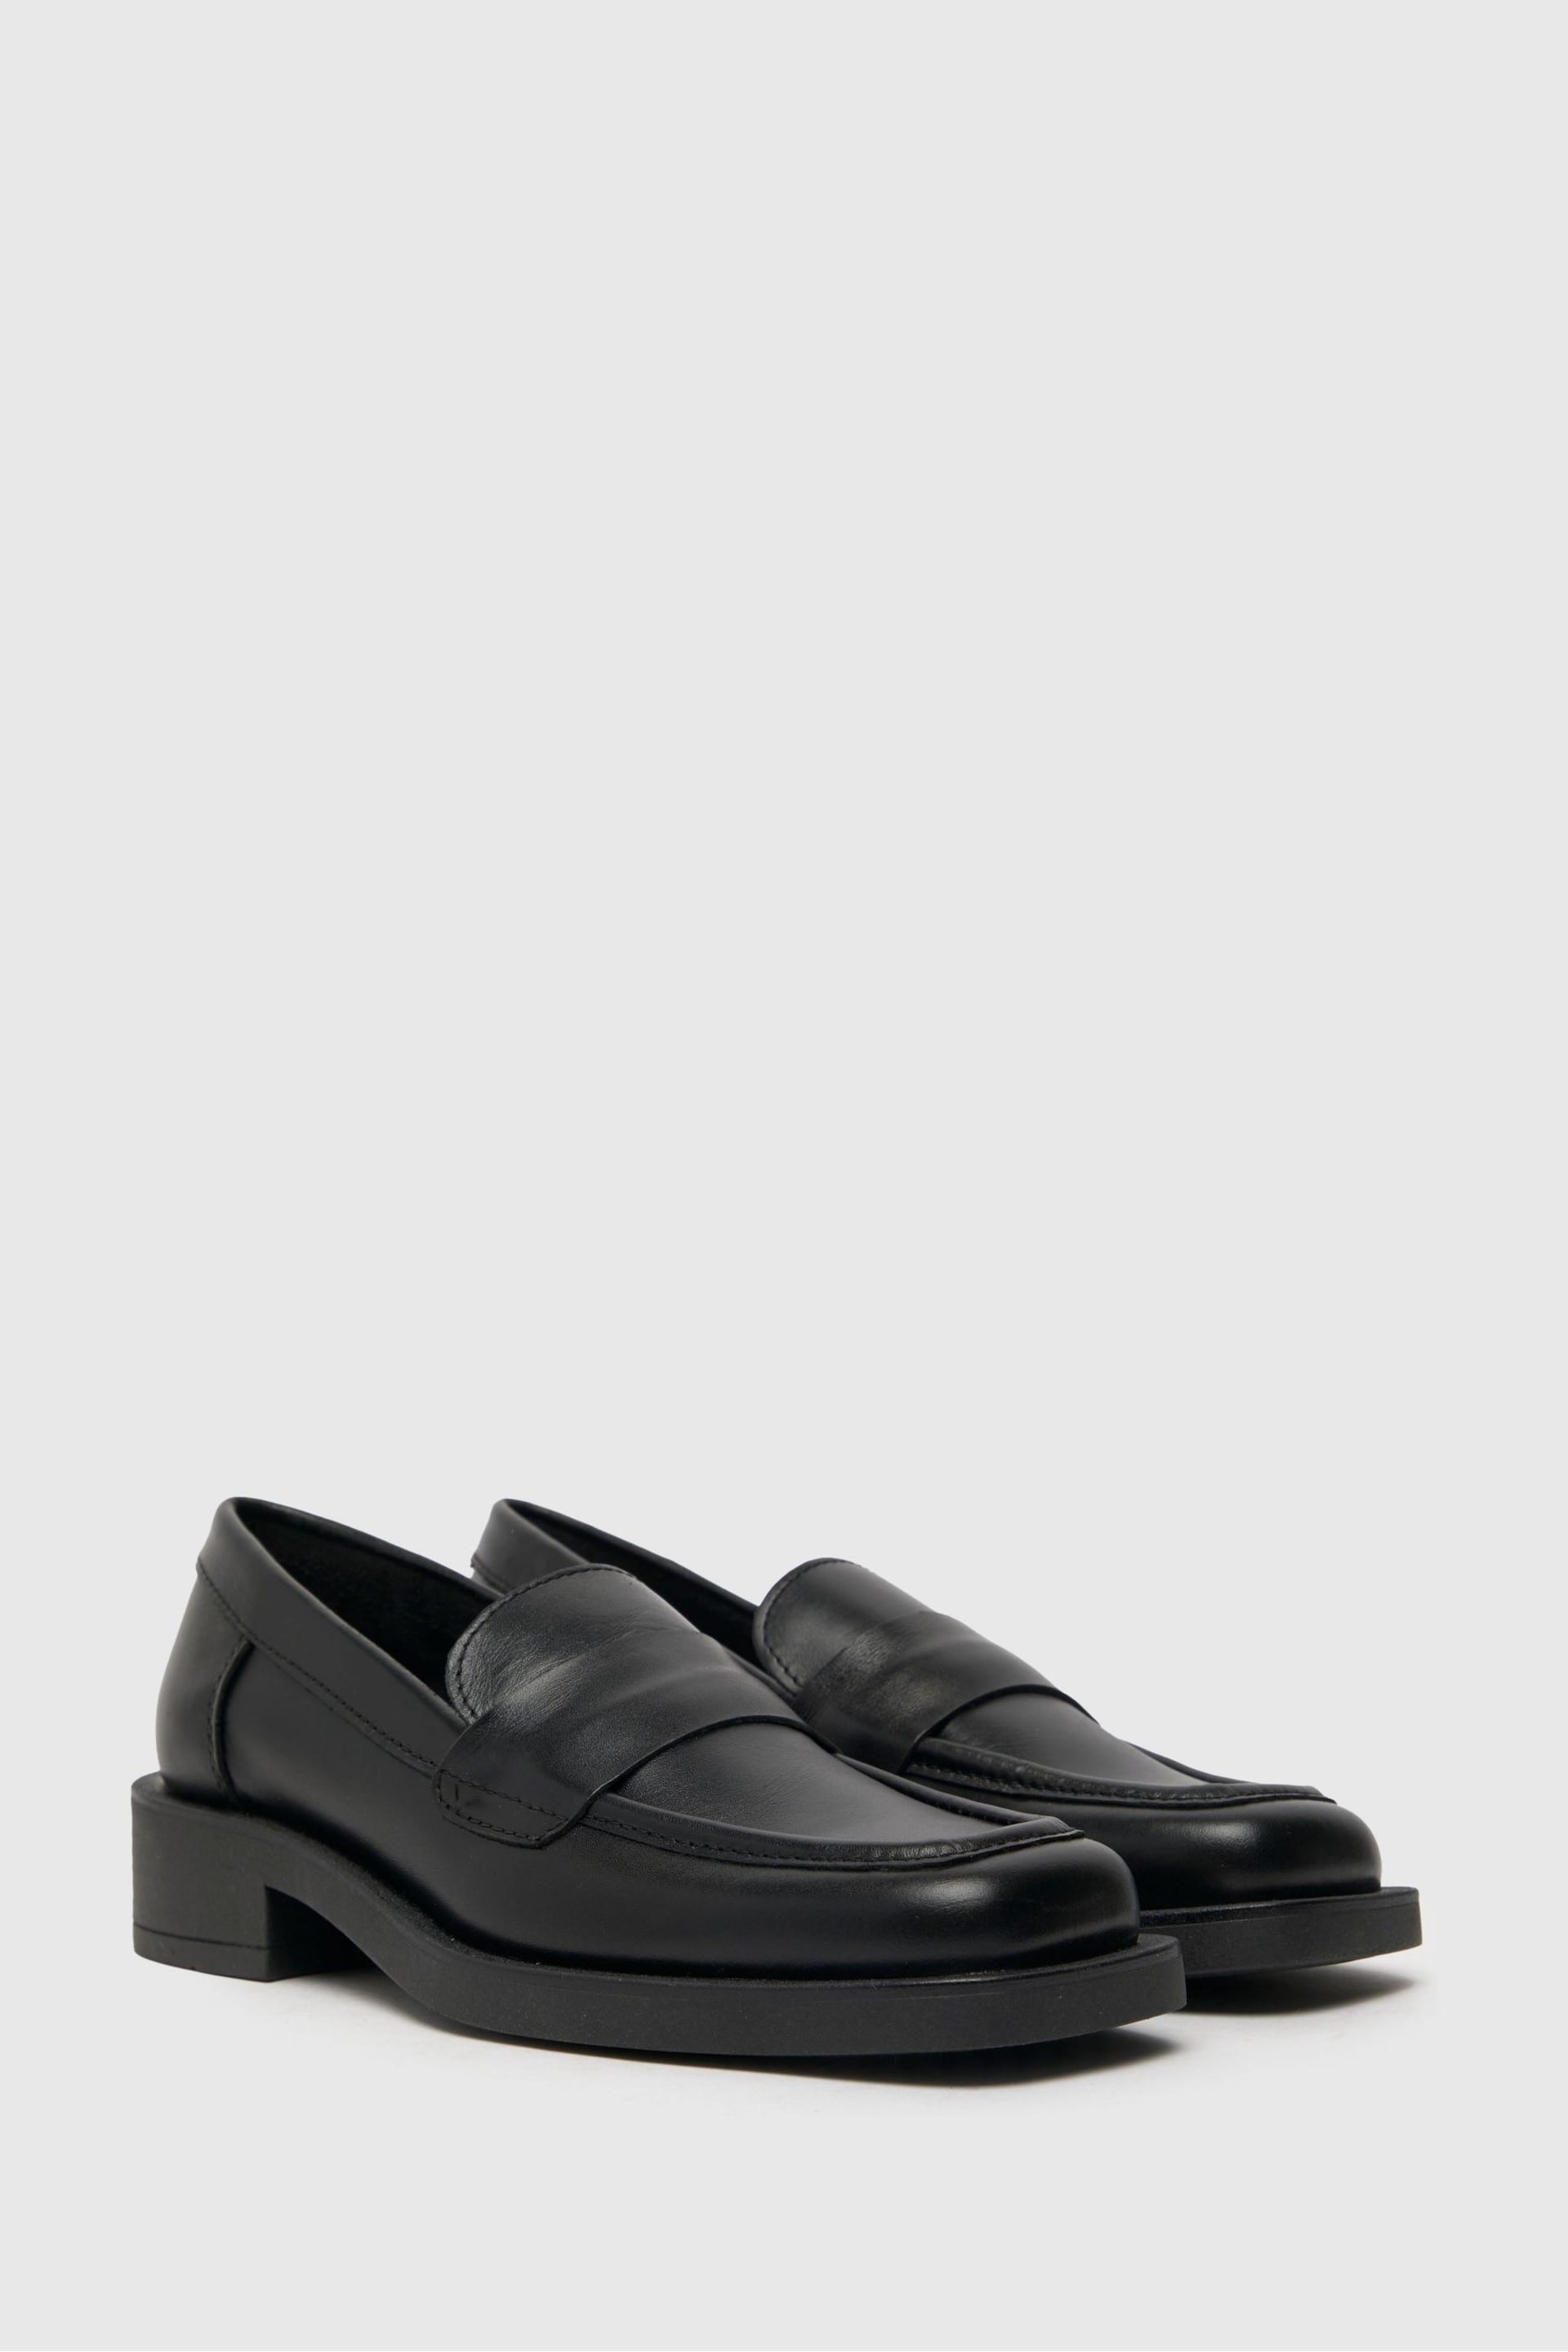 Schuh Lizzo Square Toe Loafers - Image 2 of 4